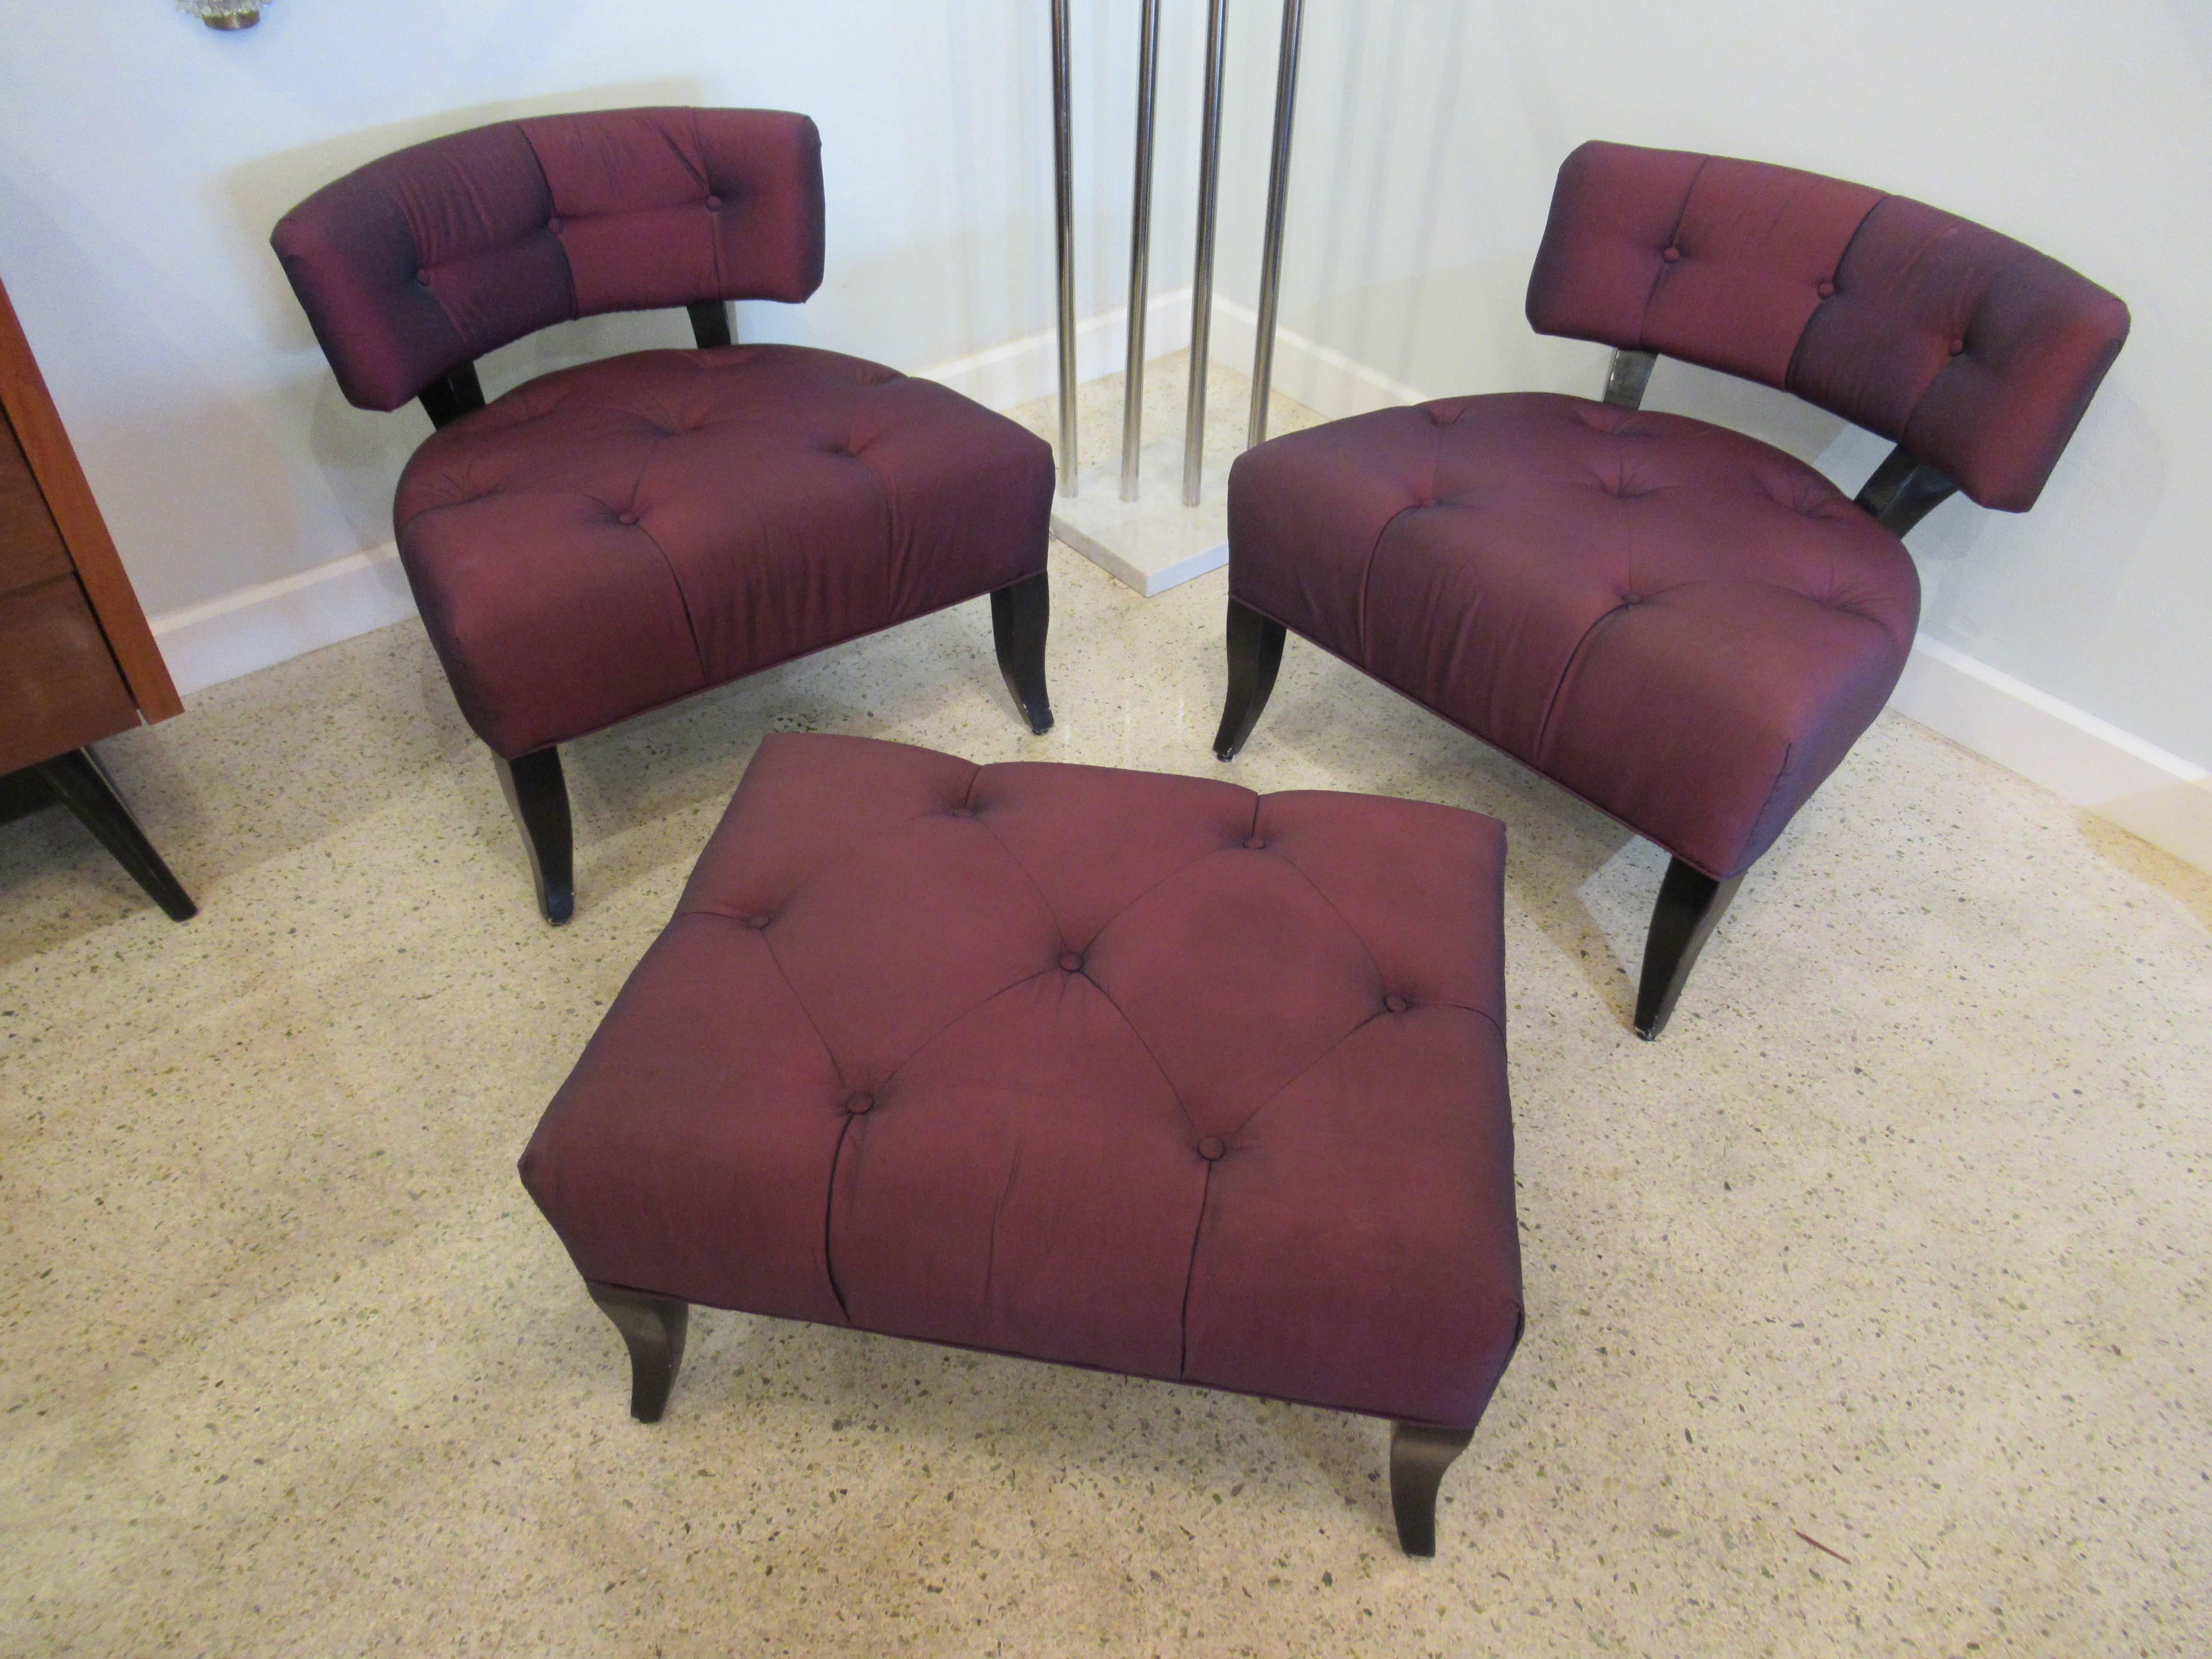 Pair of Mid-Century Modern Klismos Slipper chairs and ottoman by Billy Haines, the frames in black lacquer.